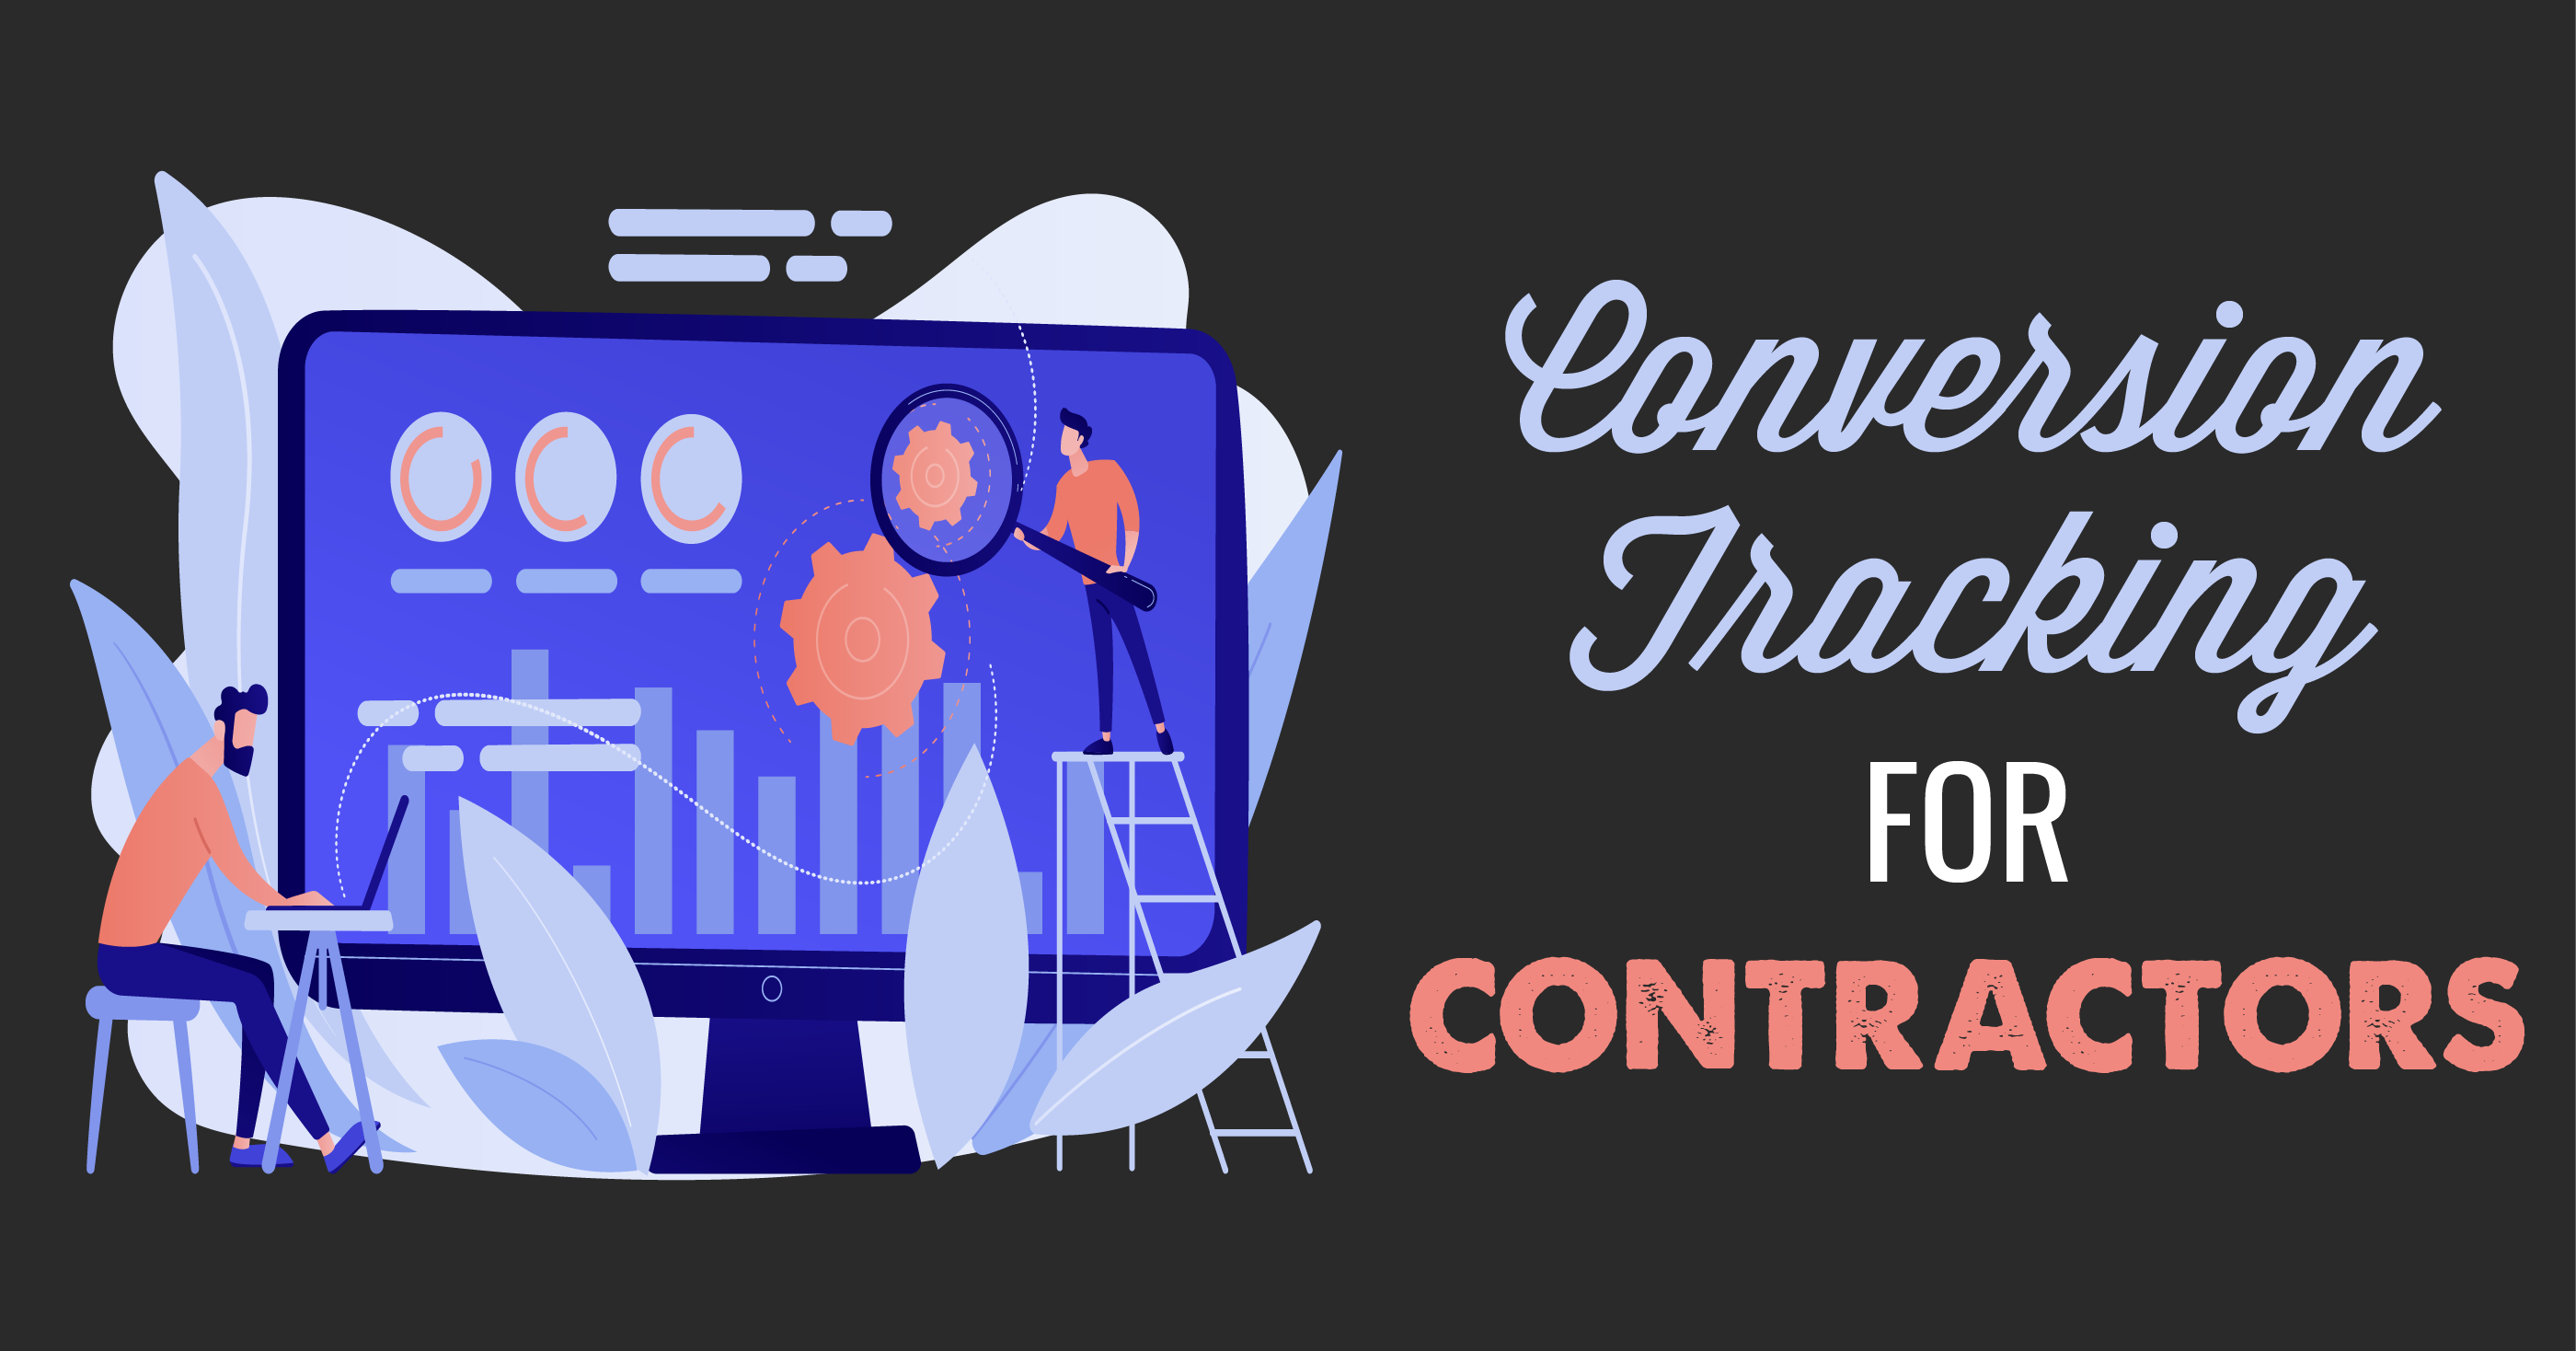 conversion tracking for contractors